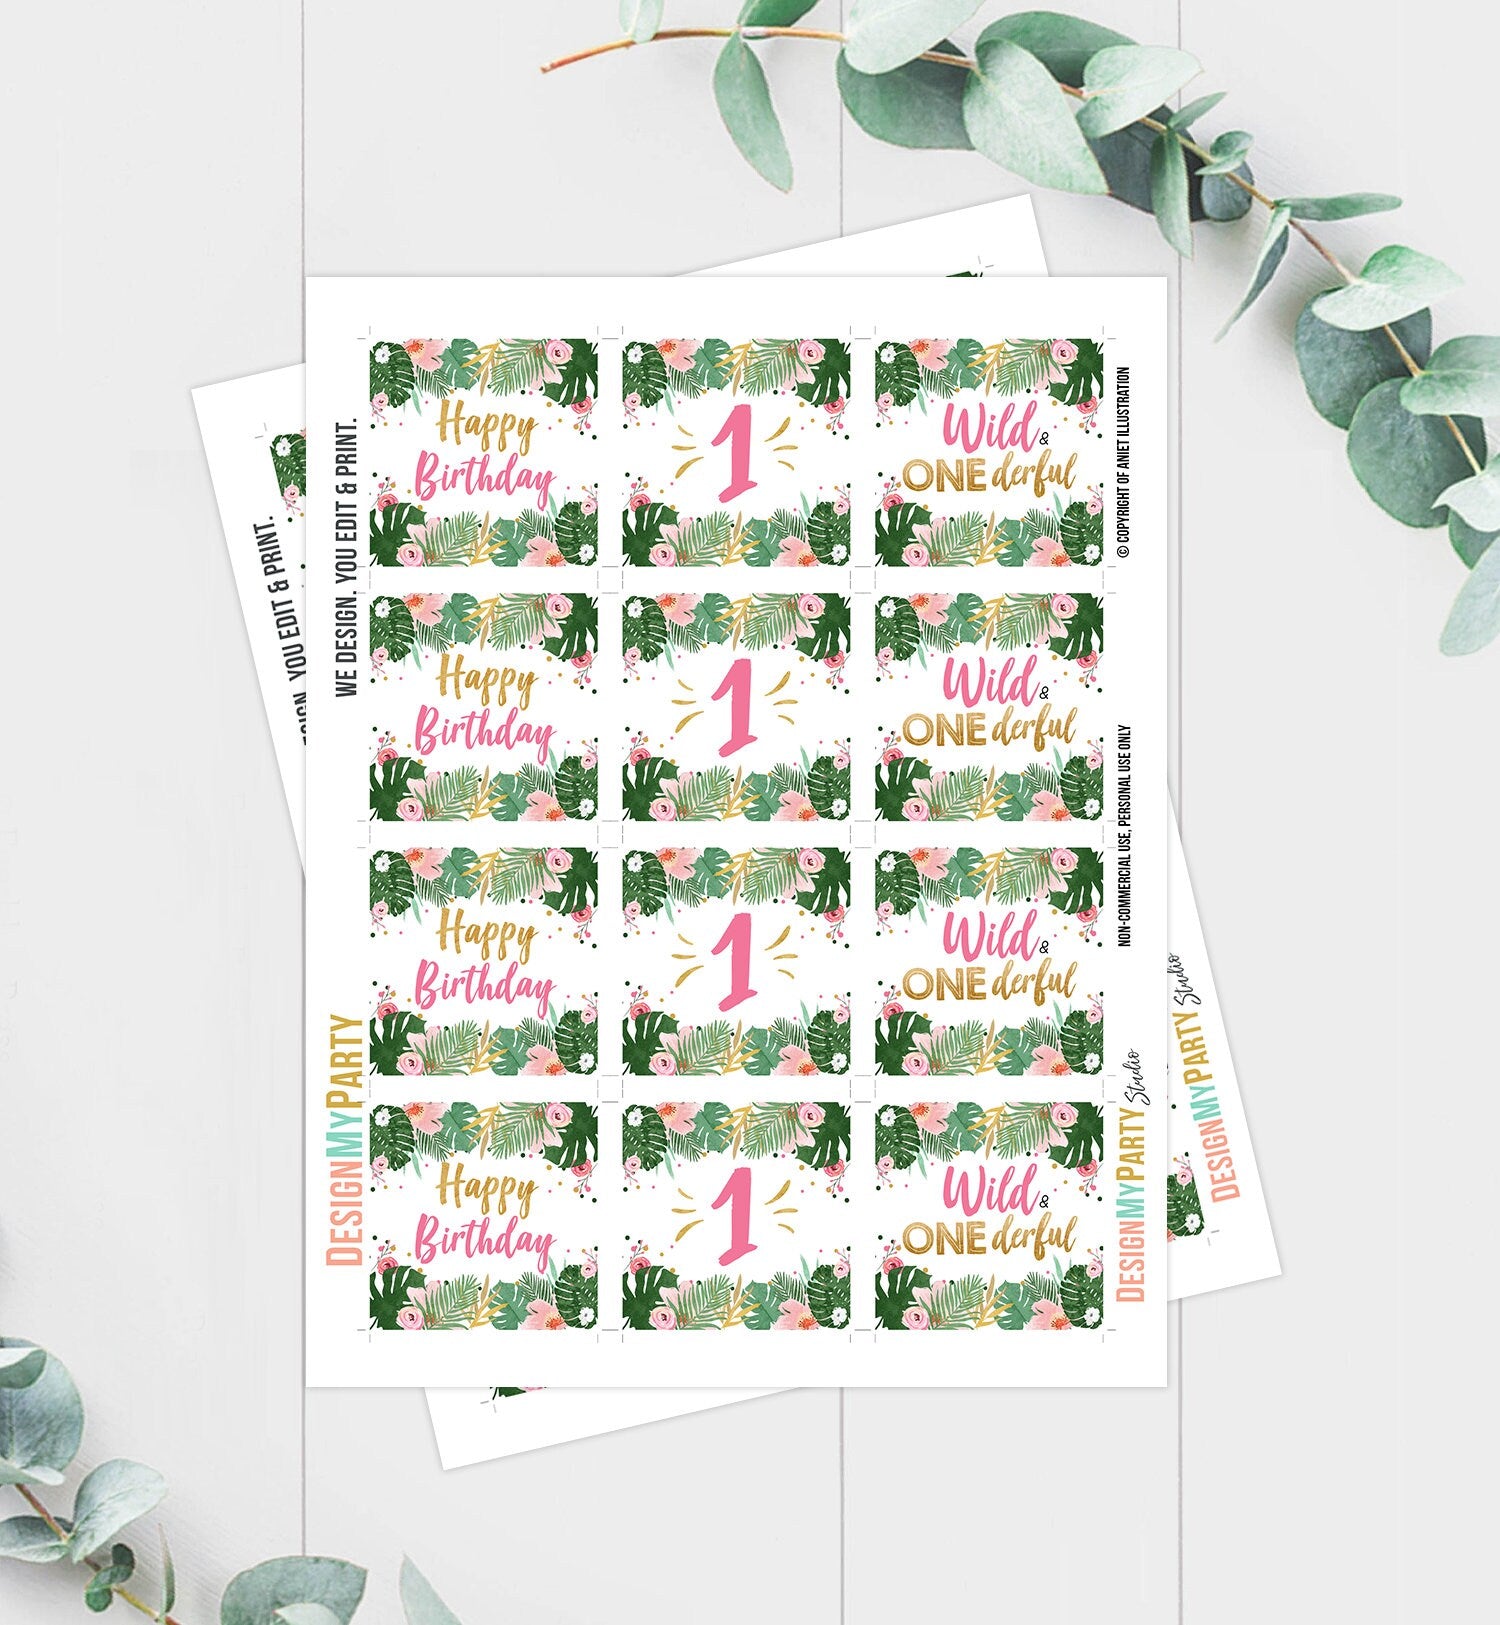 Wild and Onederful Cupcake Toppers Favor Tags Safari Party Decoration Girl First Birthday Wild One Pink Gold Download Digital PRINTABLE 0332